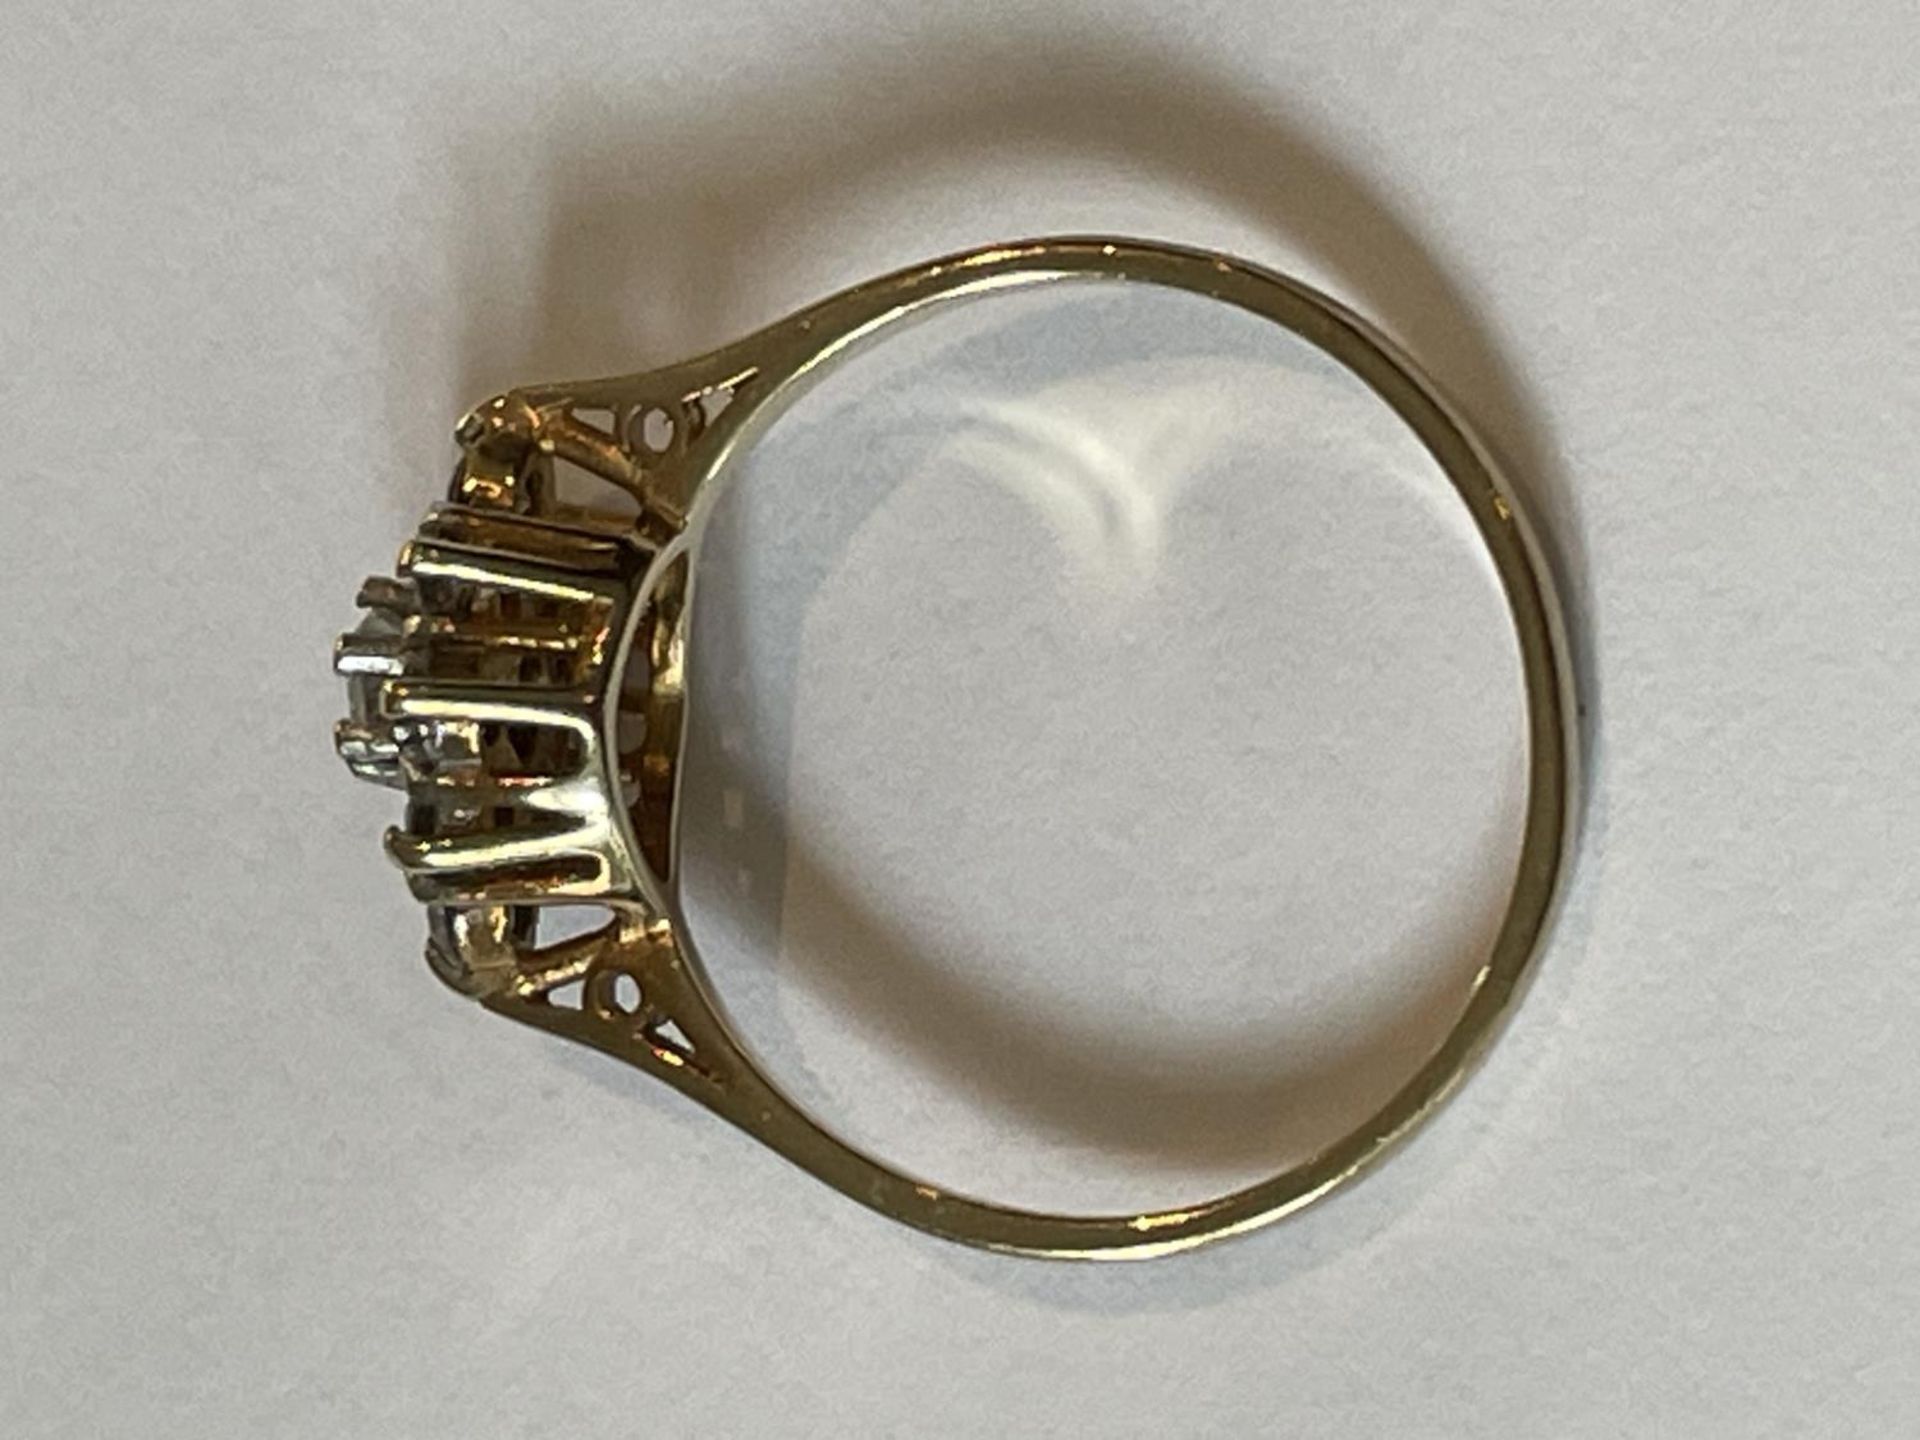 A 9 CARAT GOLD RING WITH NINE CUBIC ZIRCONIAS IN A DIAMOND PATTERN SIZE P - Image 3 of 3